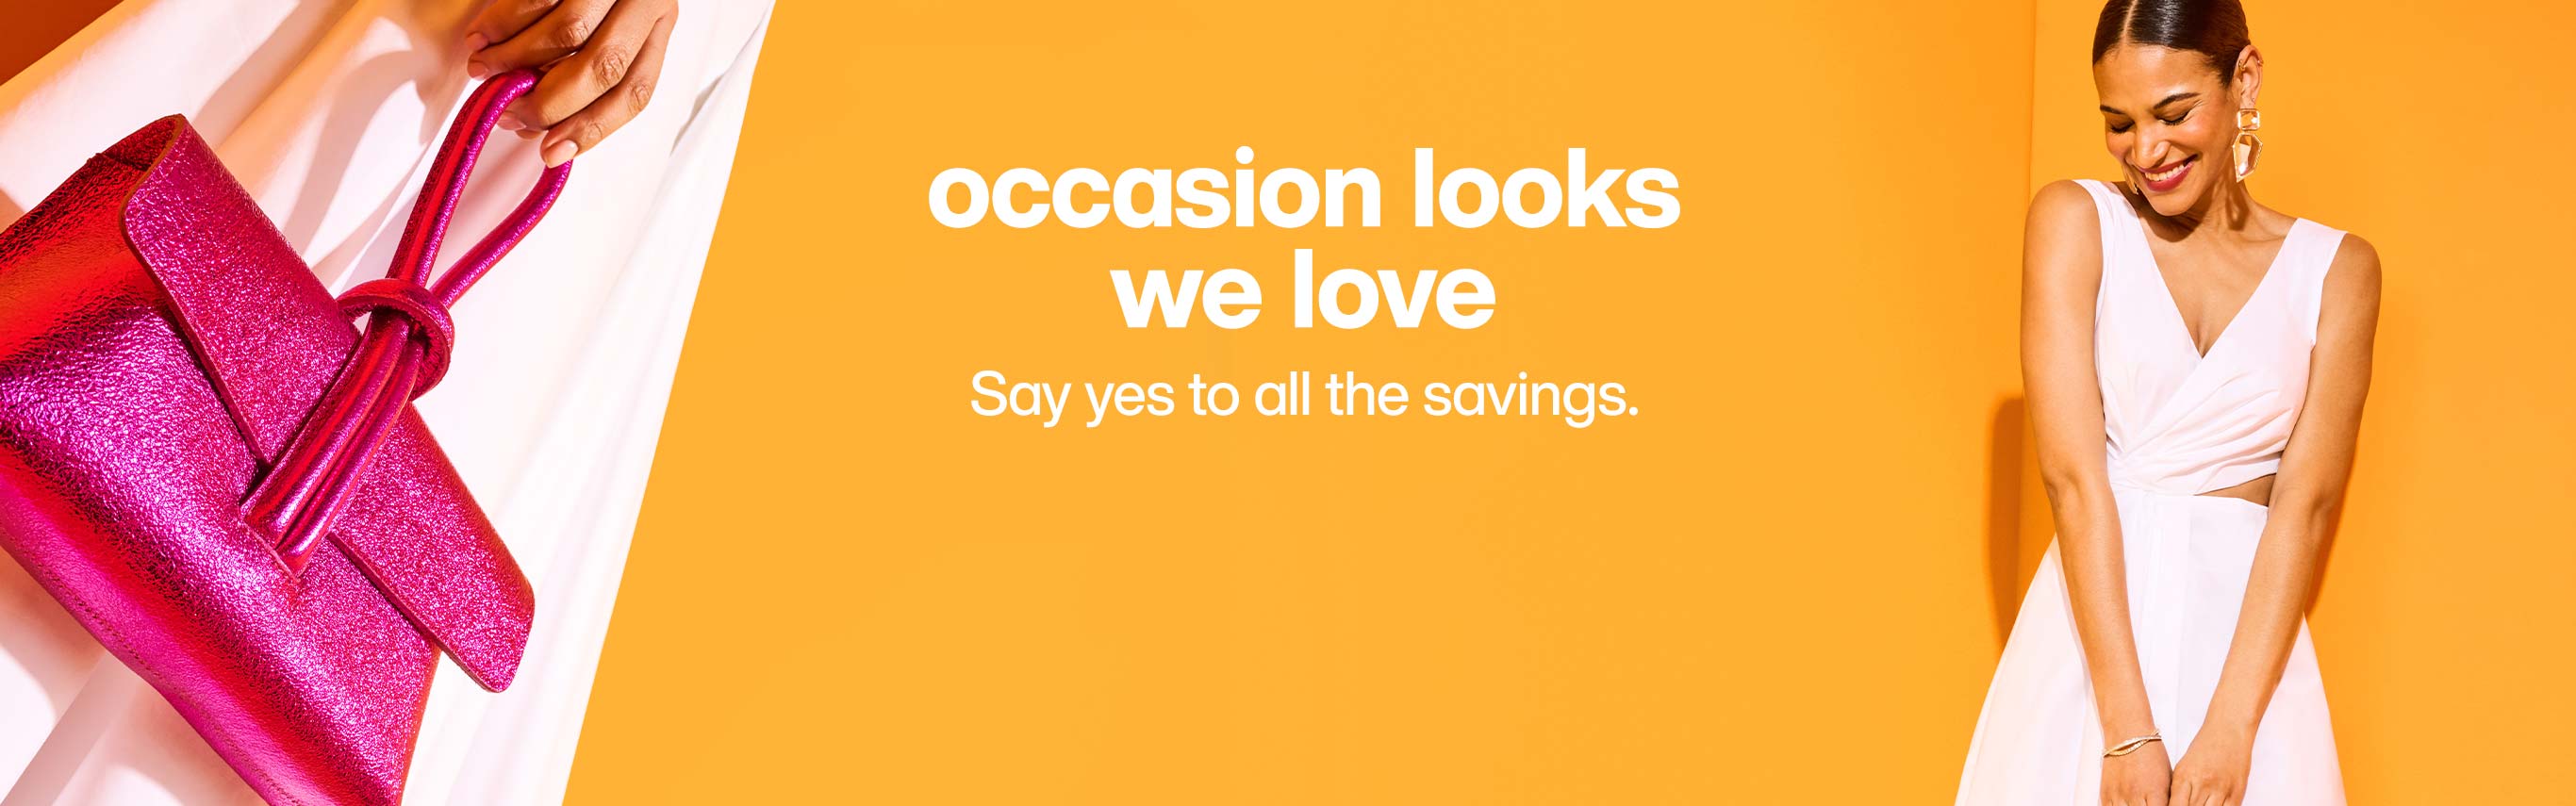 Occasion looks we love. Say yes to all the savings.